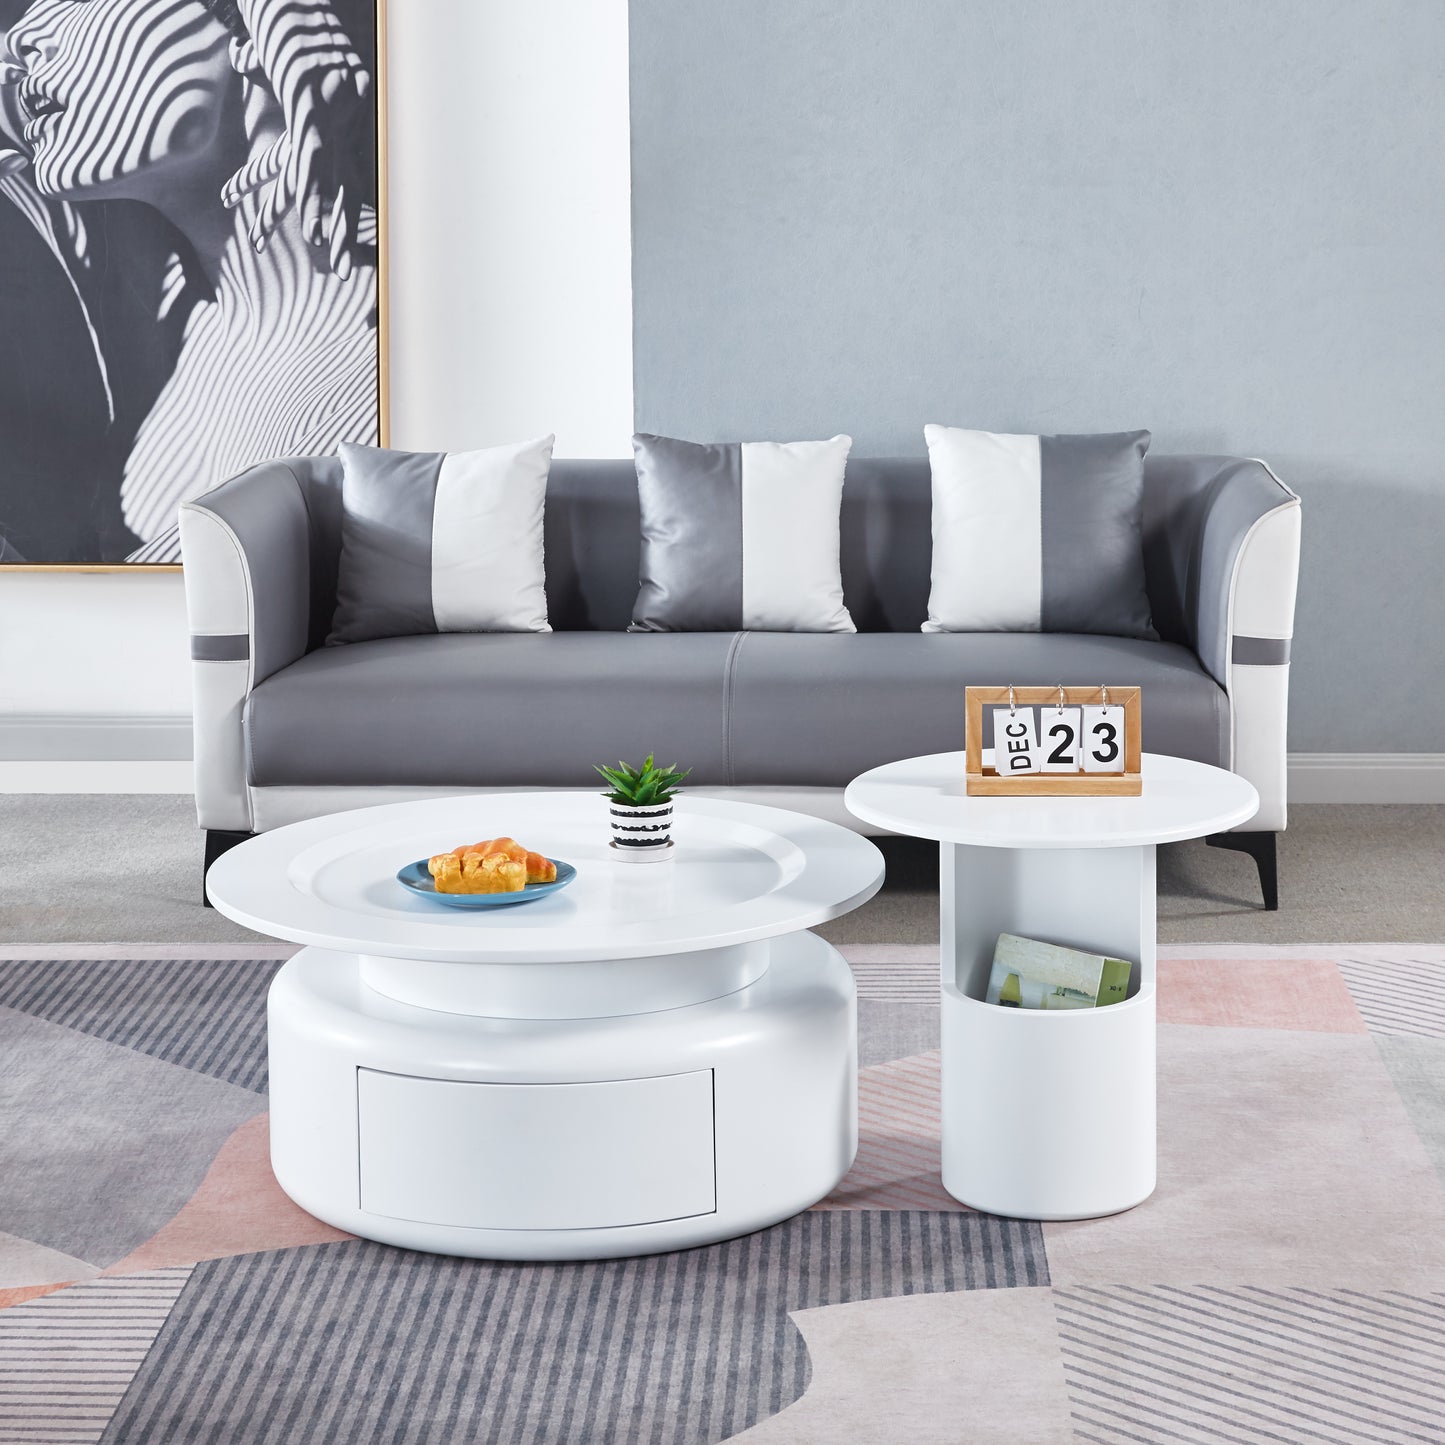 2 Pieces White MDF Round Coffee Table Set for Living Room, Bedroom